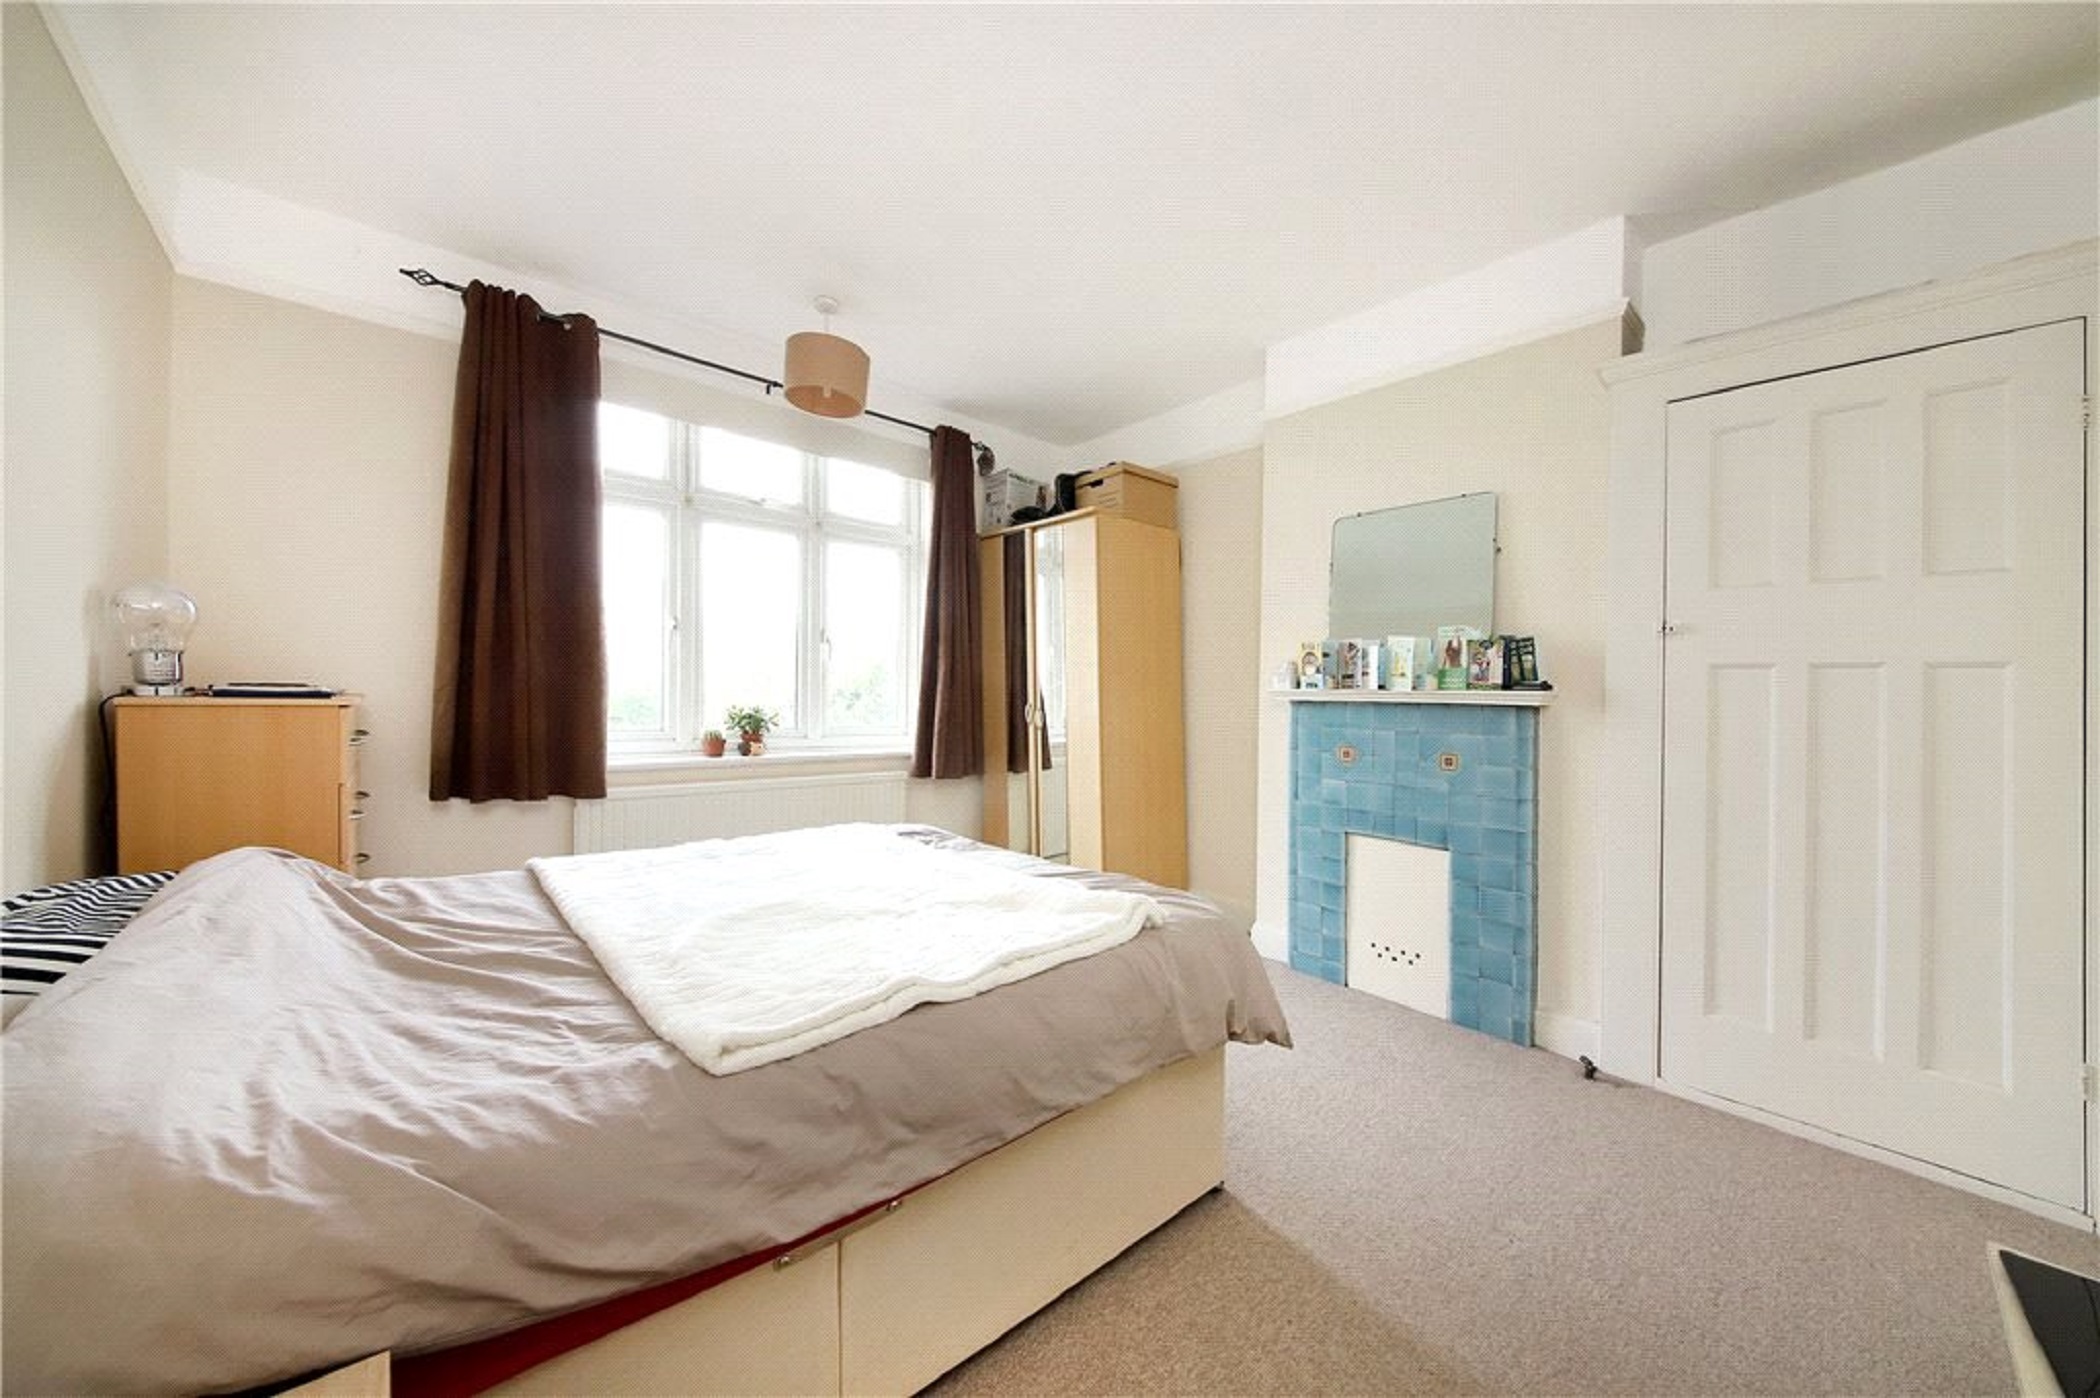 Fantactic double bedroom available in Islington London RoomsLocal image